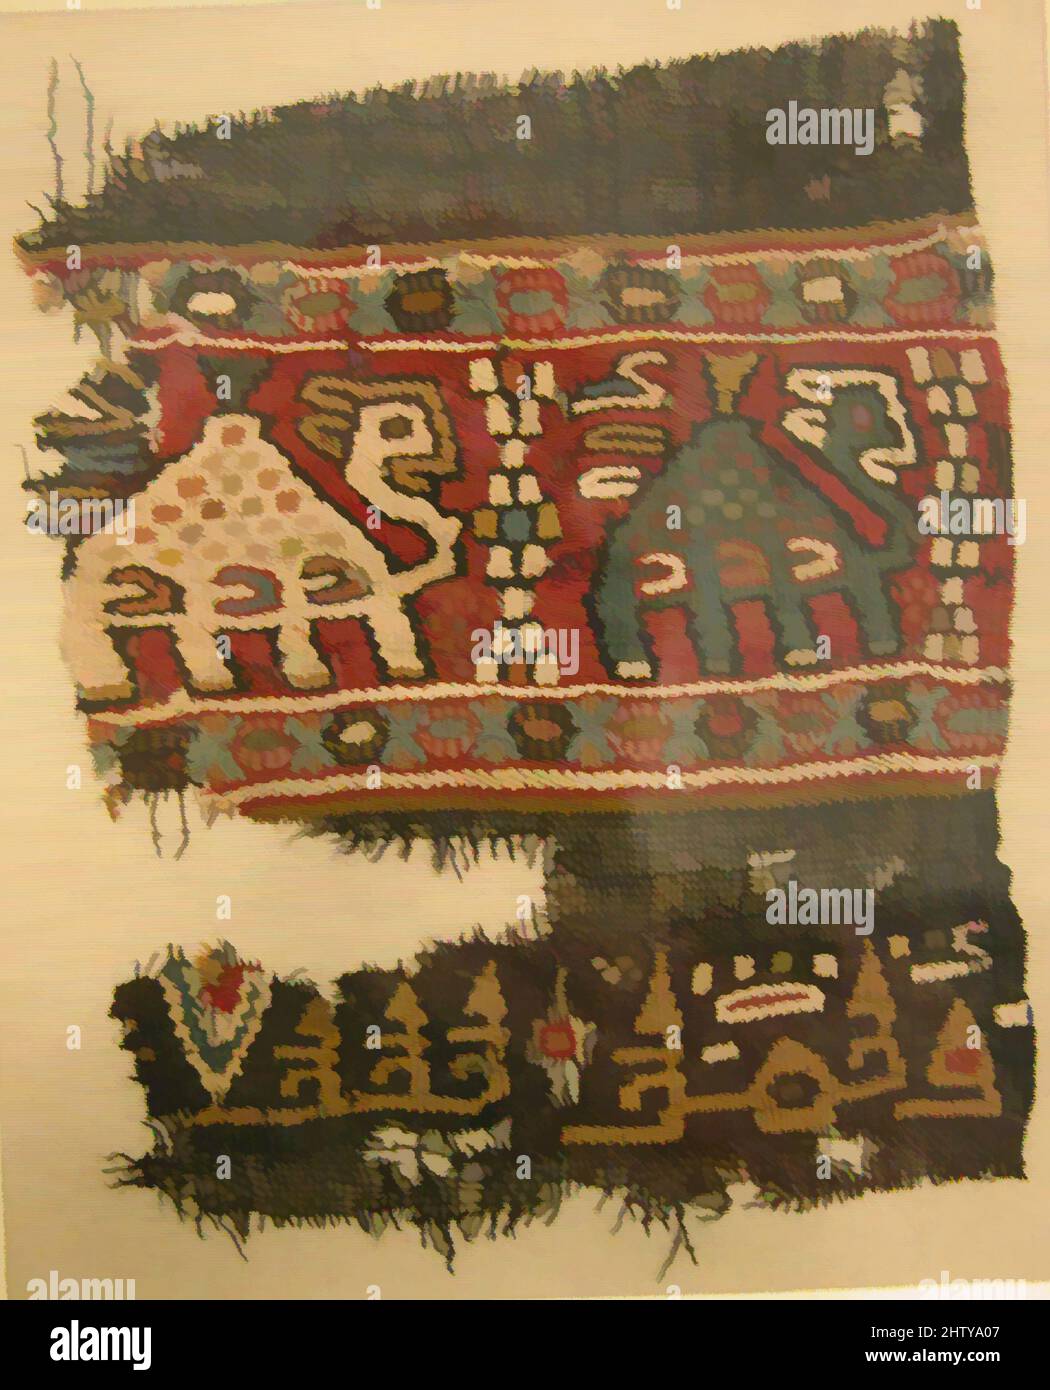 Art inspired by Fragment, 9th century, Attributed to Egypt, Fayum, Wool, Textile: L. 4 3/4 in. (12.1 cm), Textiles-Woven, Classic works modernized by Artotop with a splash of modernity. Shapes, color and value, eye-catching visual impact on art. Emotions through freedom of artworks in a contemporary way. A timeless message pursuing a wildly creative new direction. Artists turning to the digital medium and creating the Artotop NFT Stock Photo